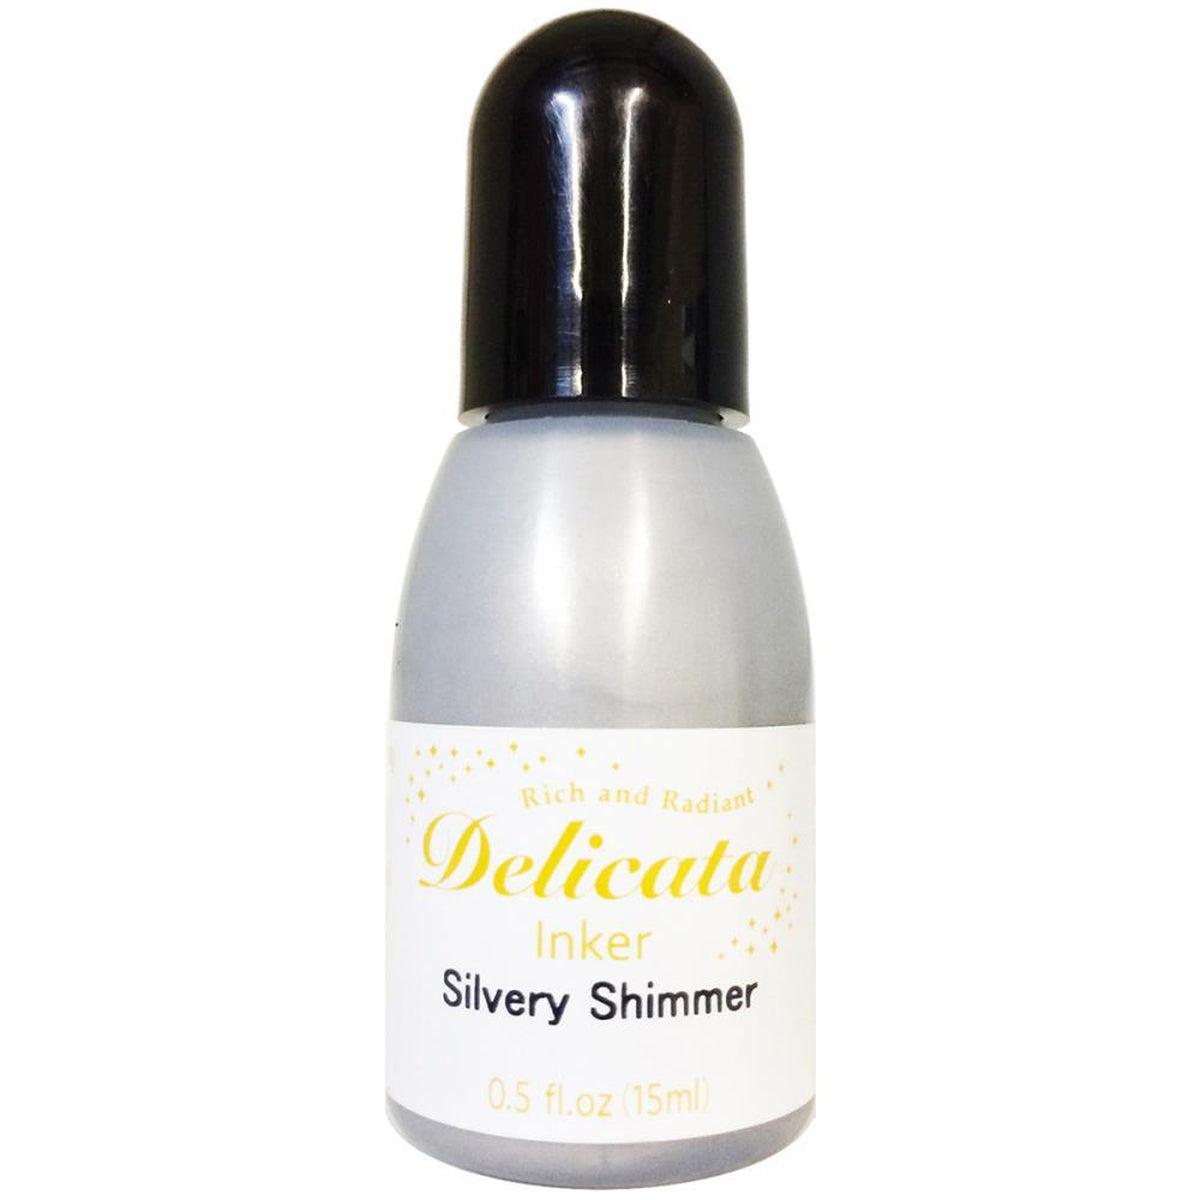 Silvery Shimmer Pigment Ink Refill .5oz by Delicata - Kat Scrappiness